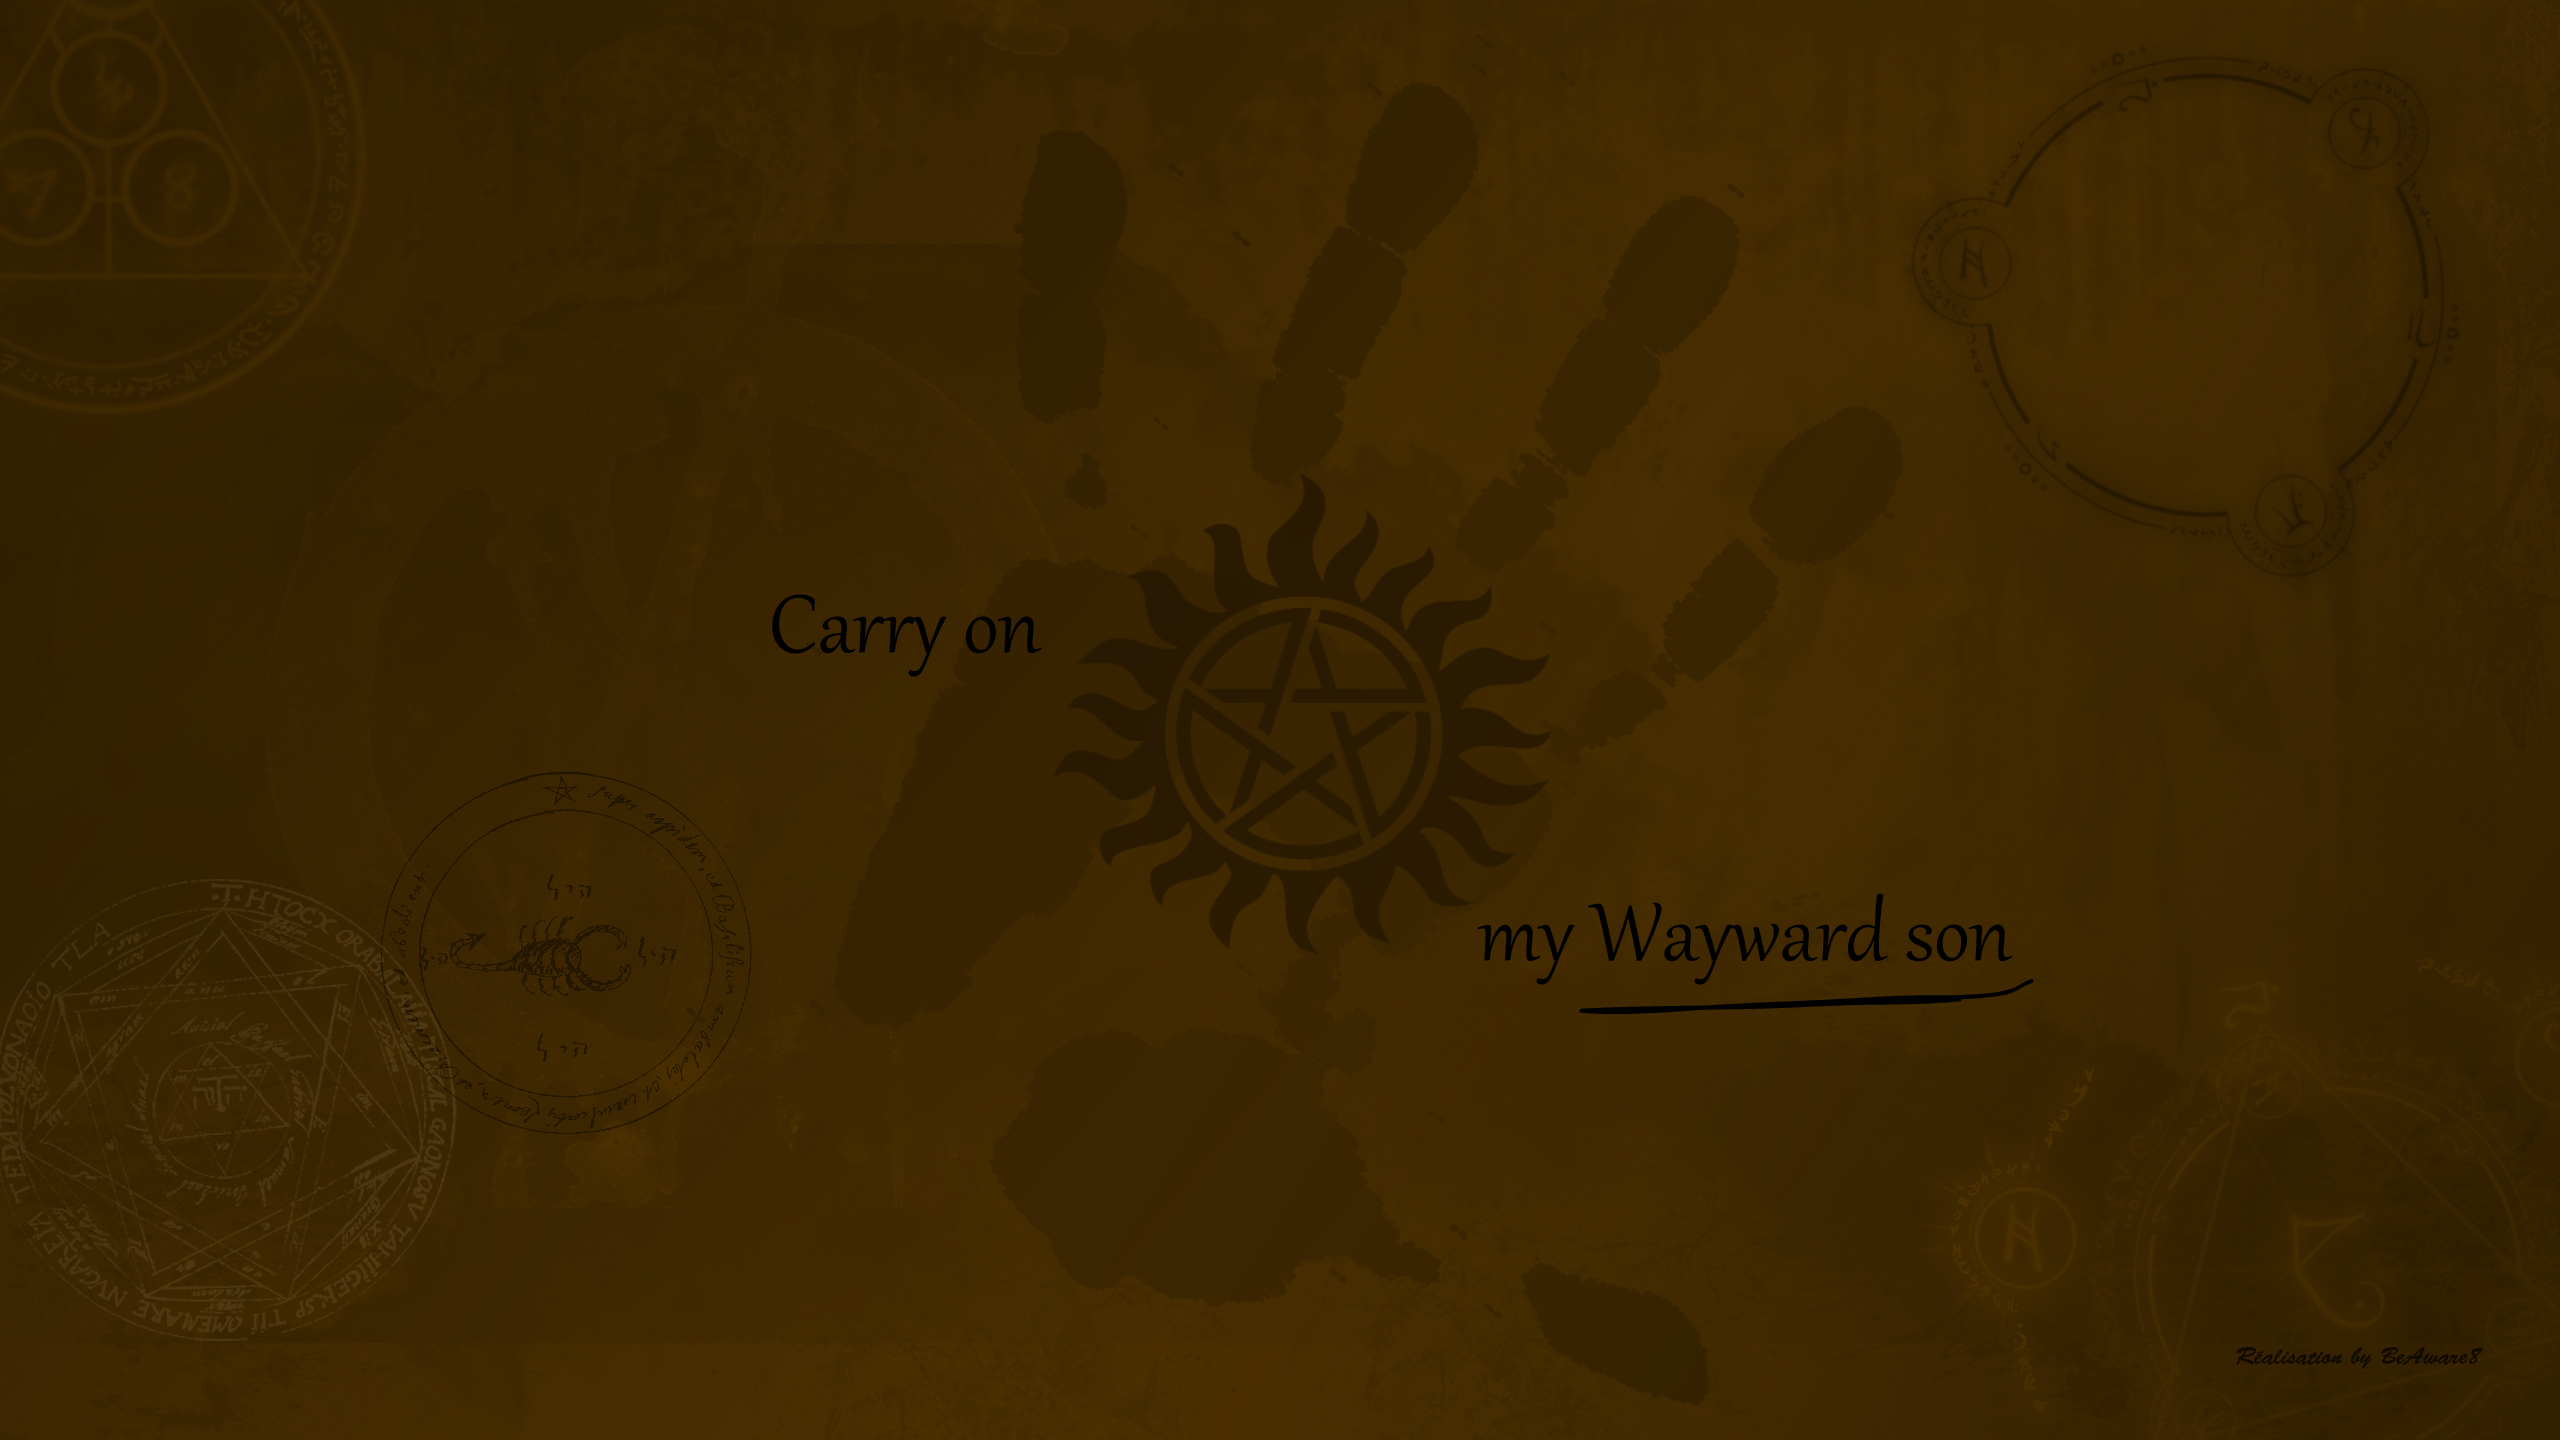 Supernatural Carry On My Wayward Son Wallpaper By Beaware8